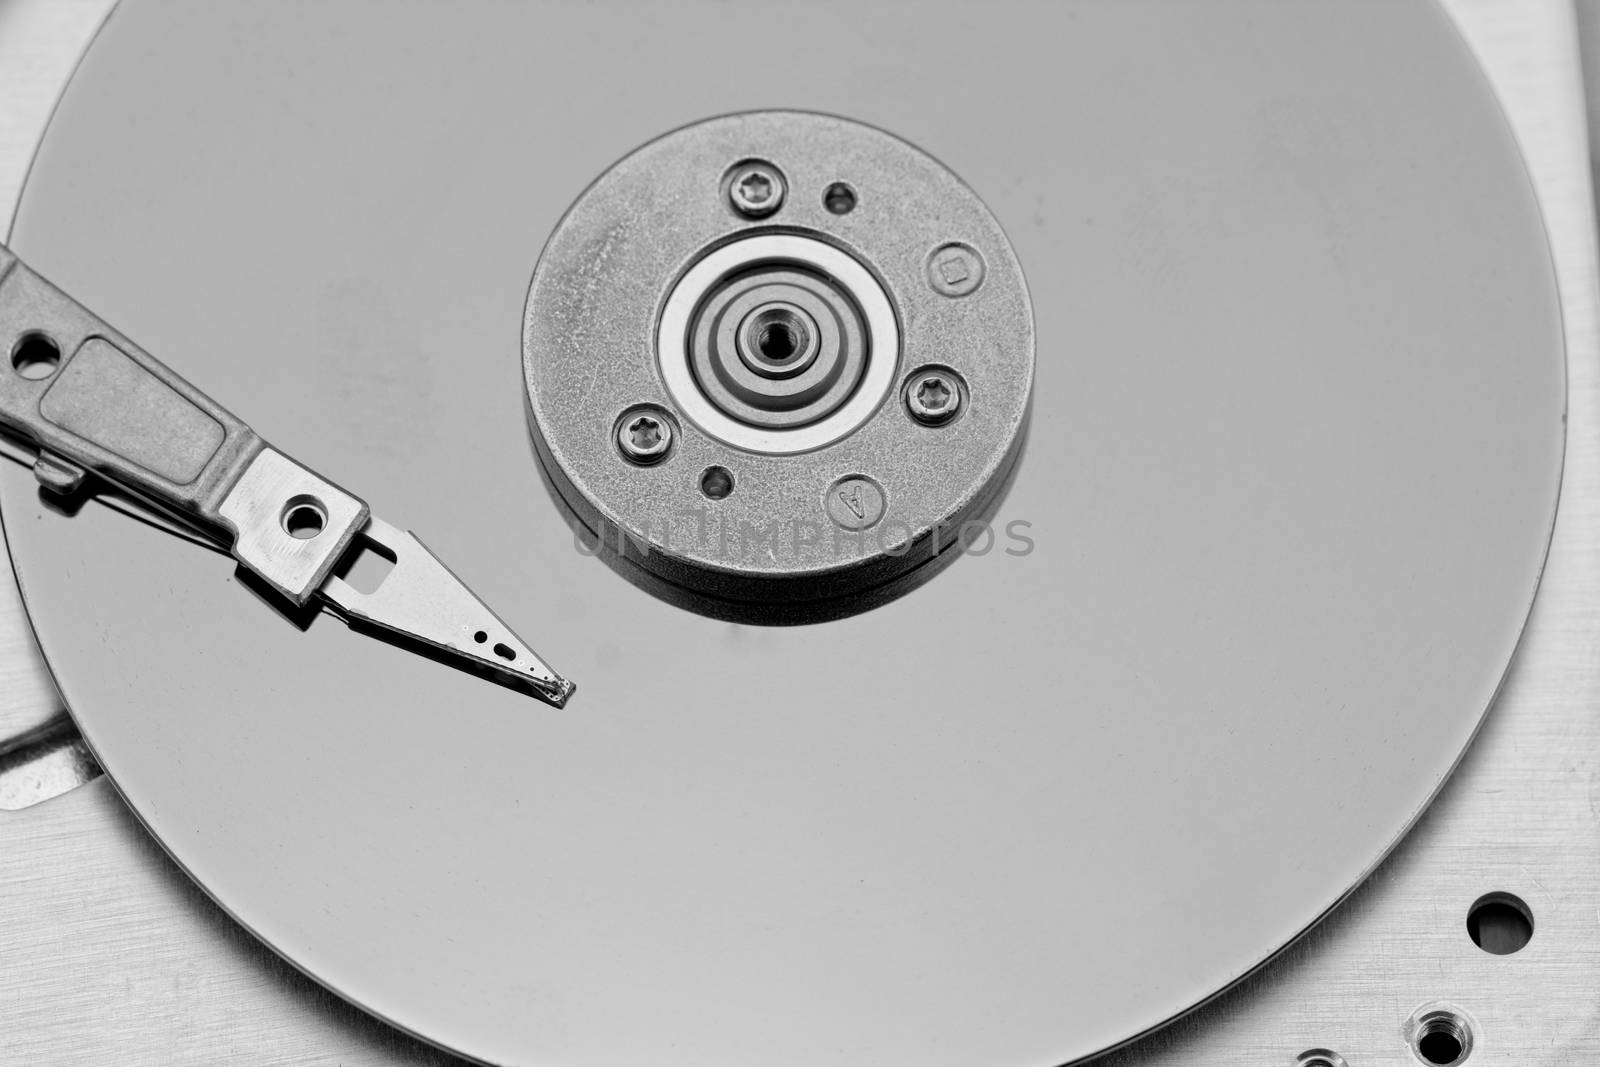 Open computer hard drive on white background in bw color (HDD, Winchester)